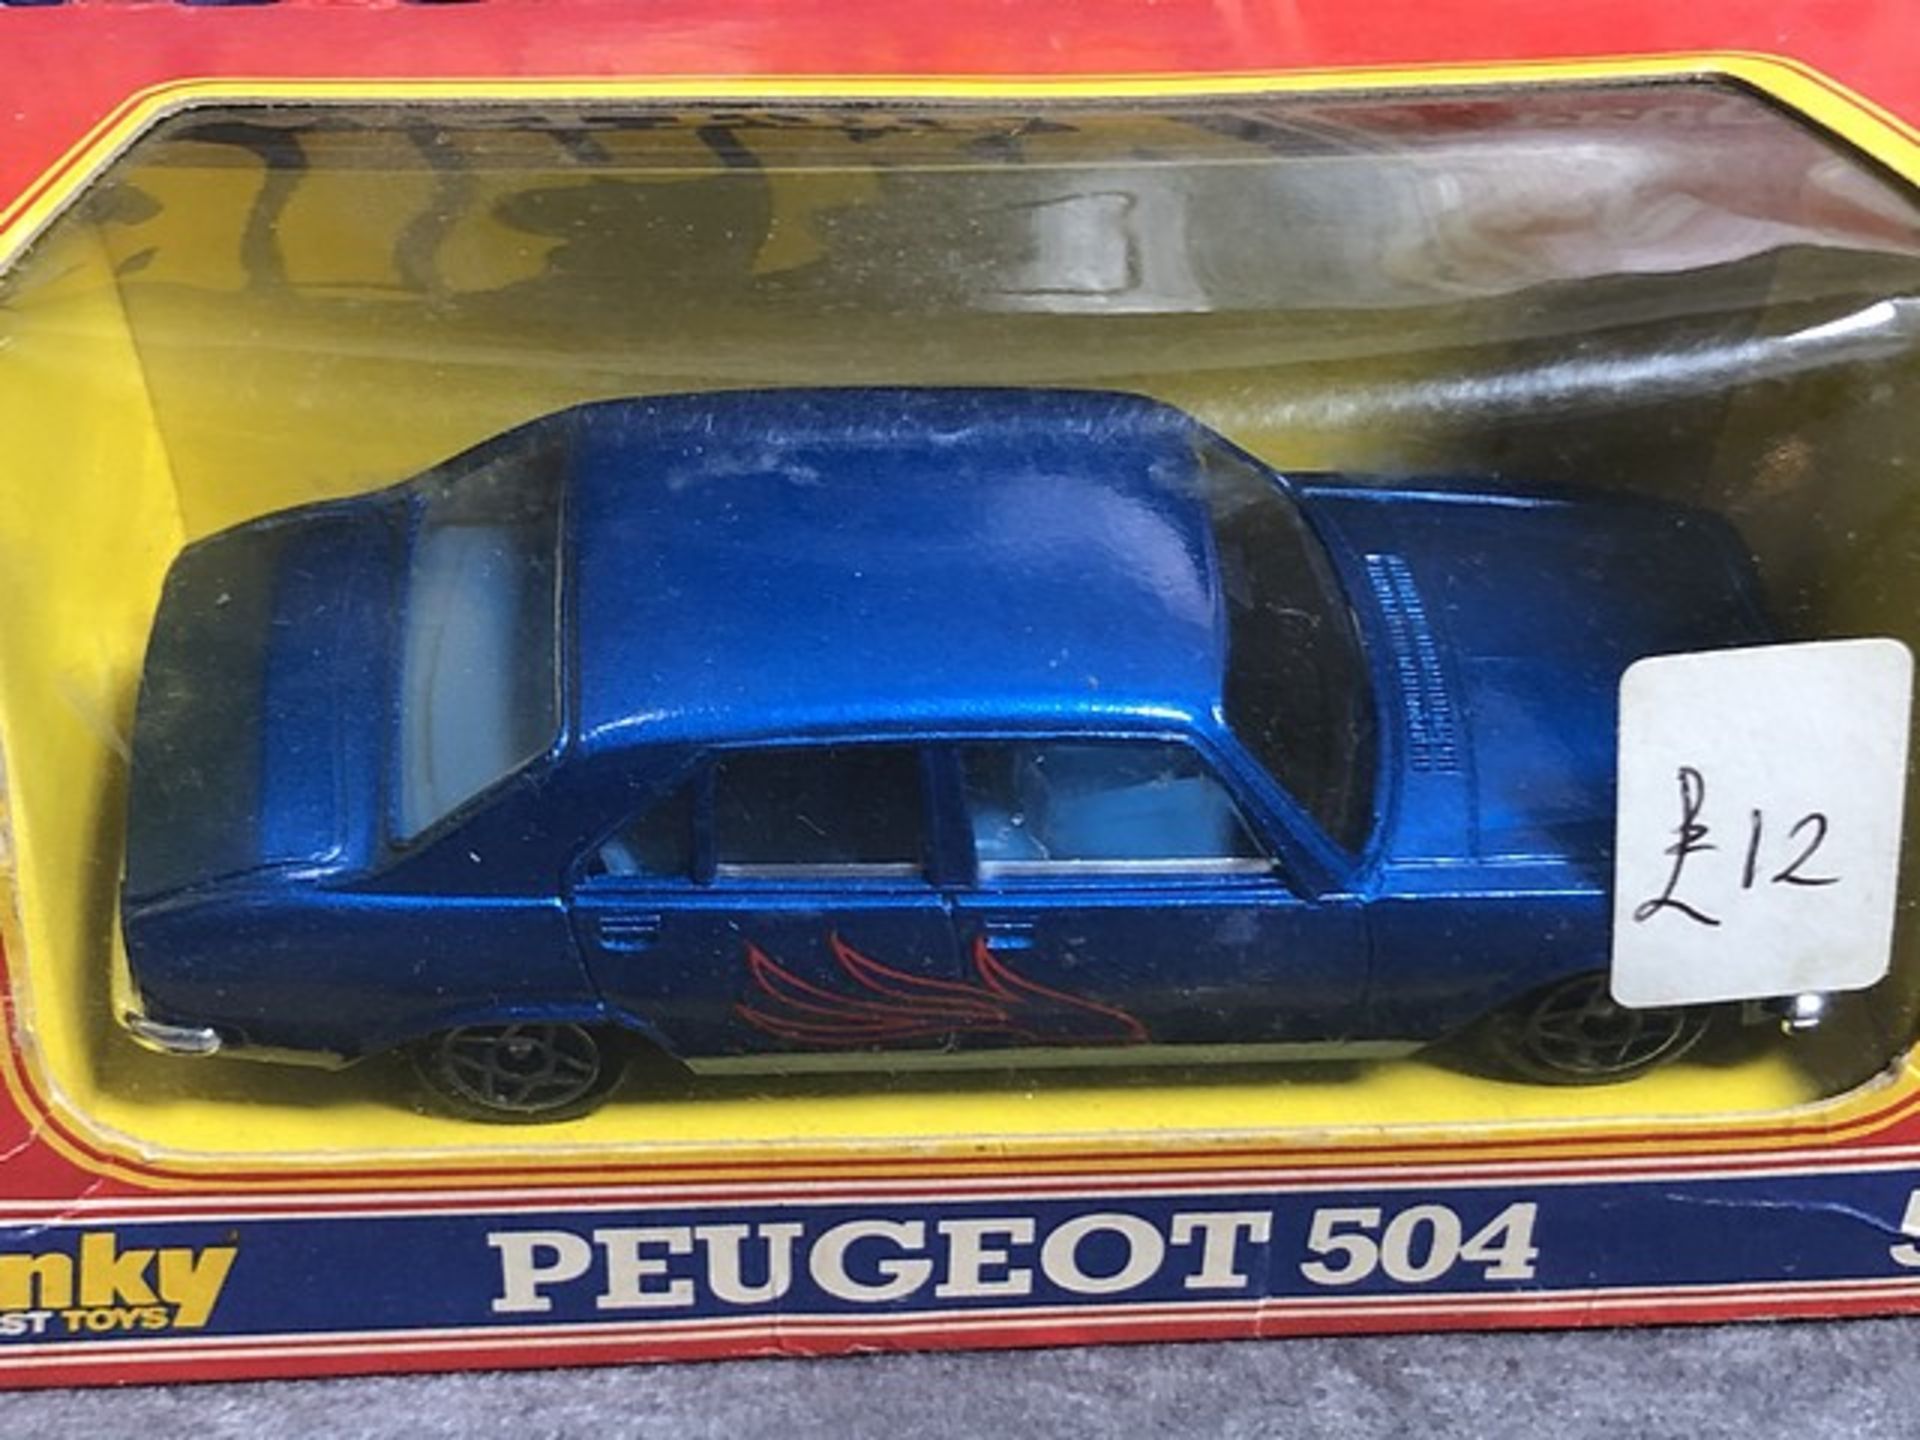 Dinky Toys Diecast #505 Peugeot 504 Complete With Box - Image 2 of 2